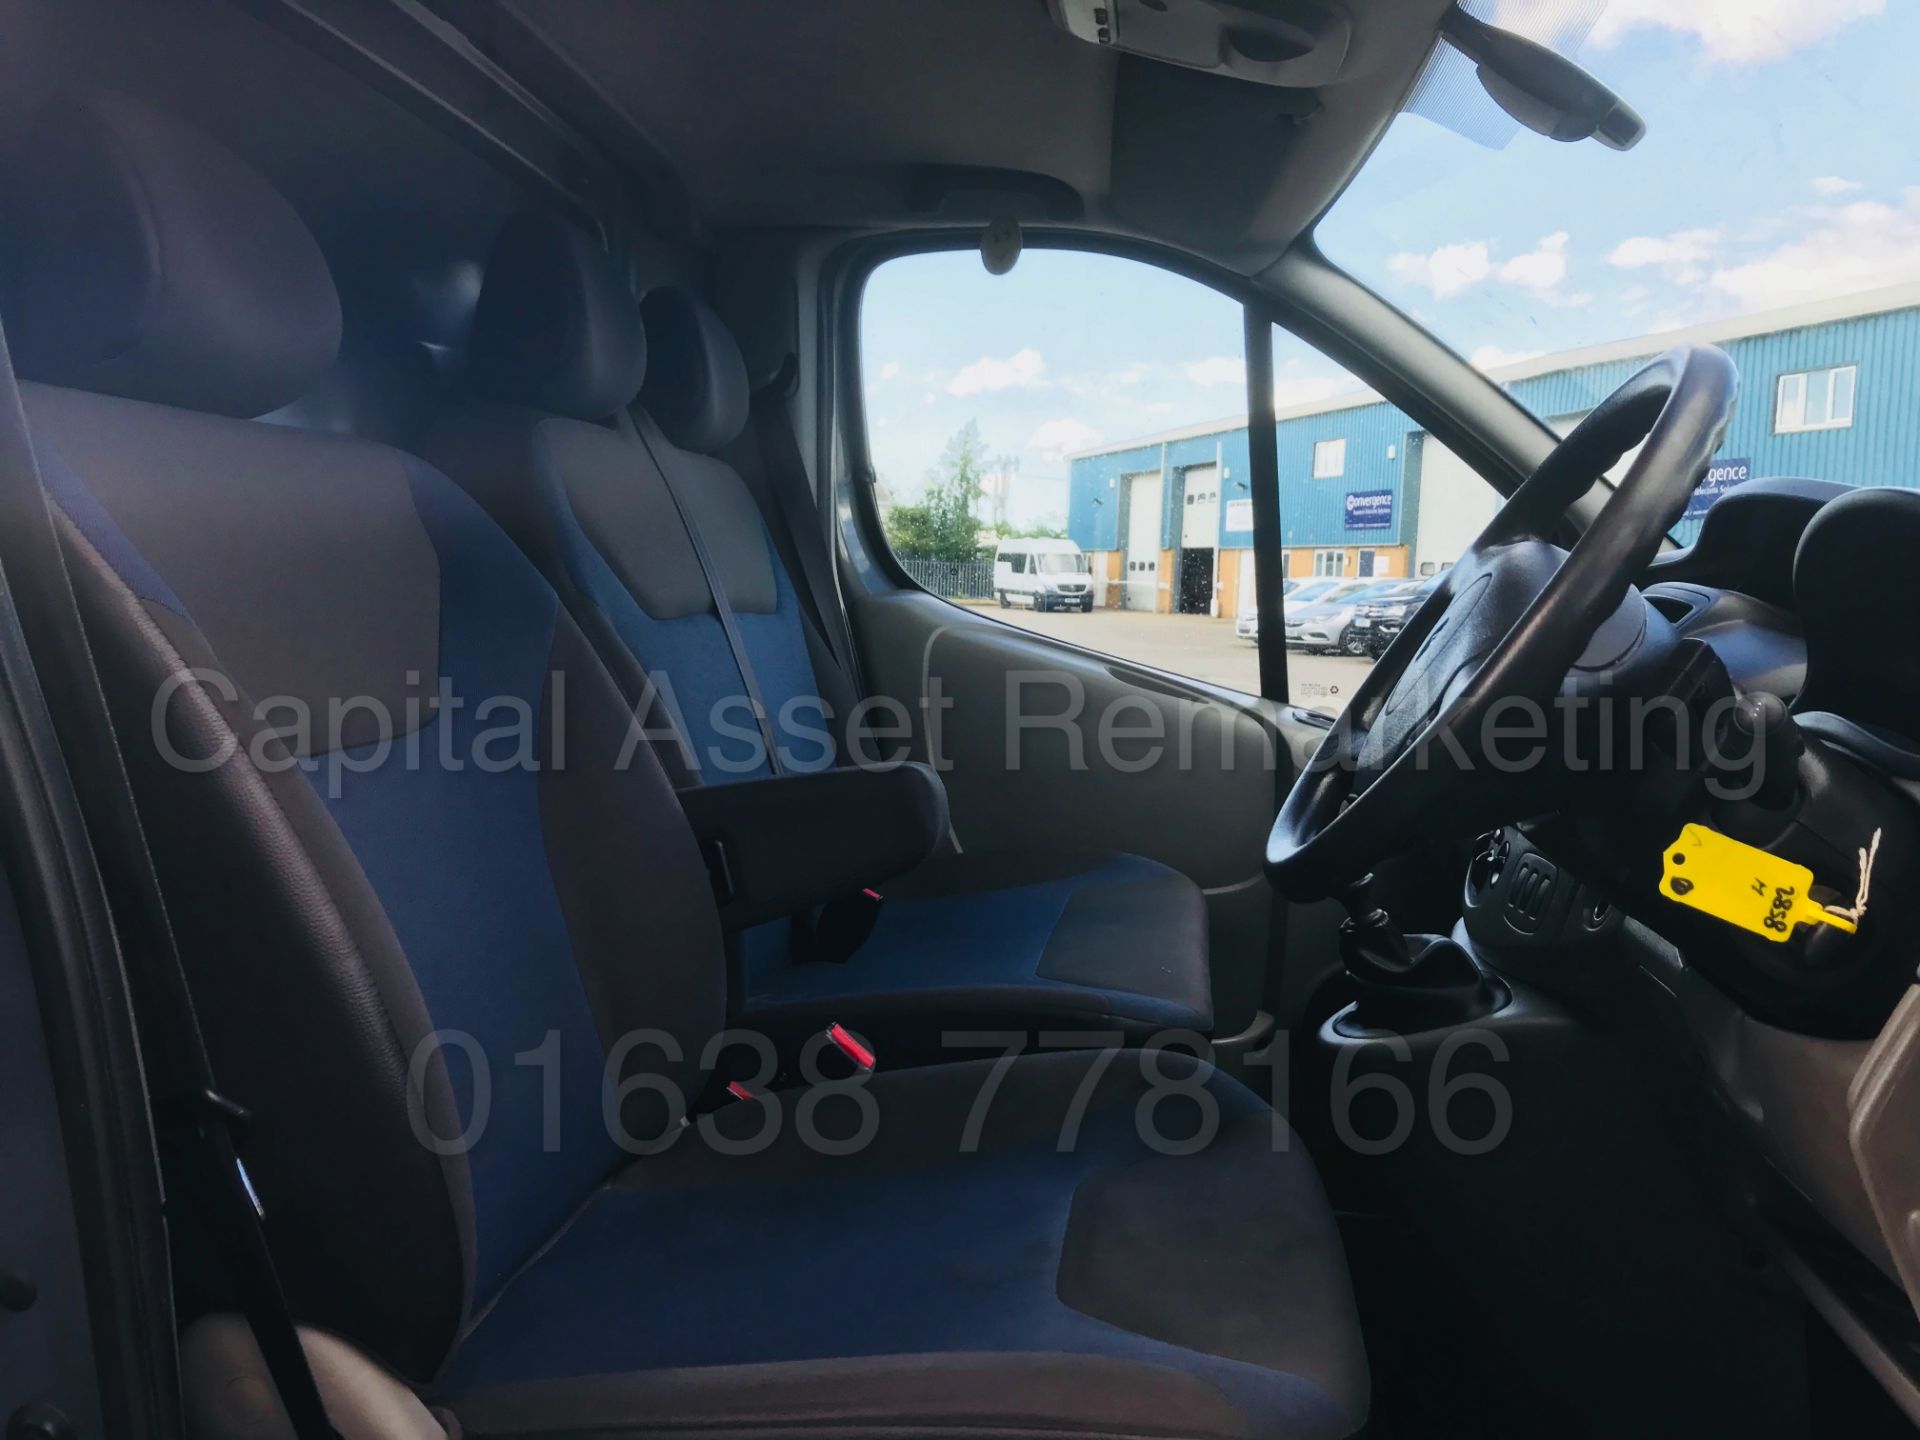 (On Sale) RENAULT TRAFIC 'SPORT EDITION' LWB (2014) '2.0 DCI - 115 BHP - 6 SPEED' *AIR CON* (NO VAT) - Image 34 of 40